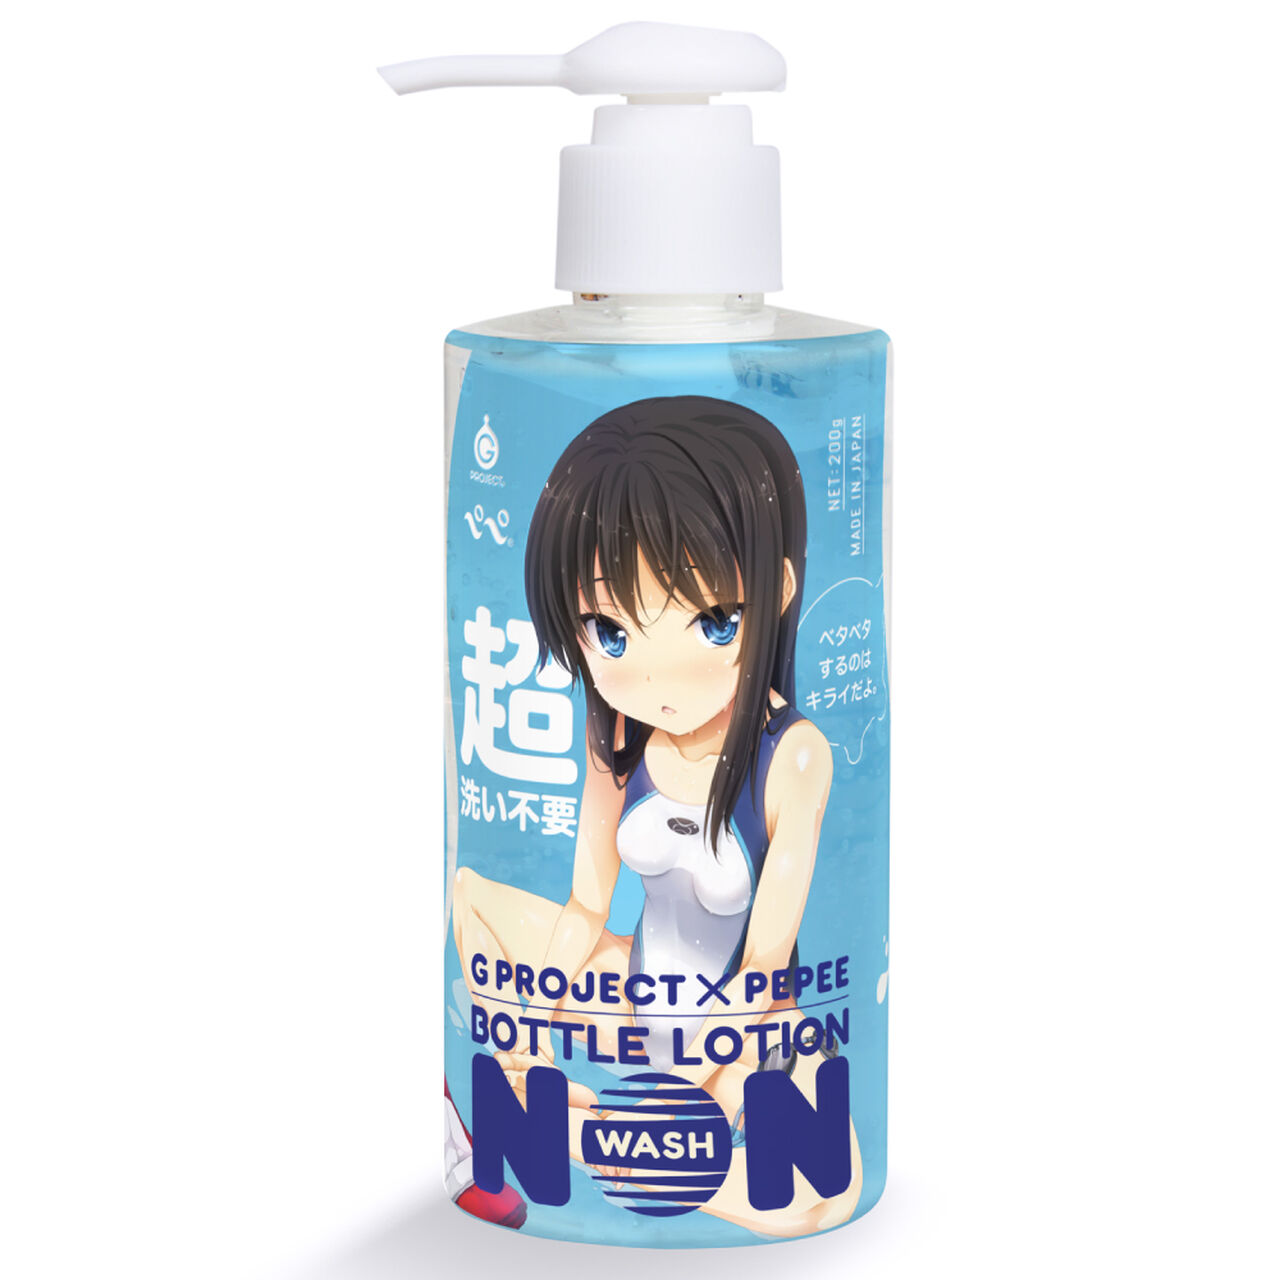 G PROJECT × PEPEE BOTTLE LOTION NON WASH,, large image number 0